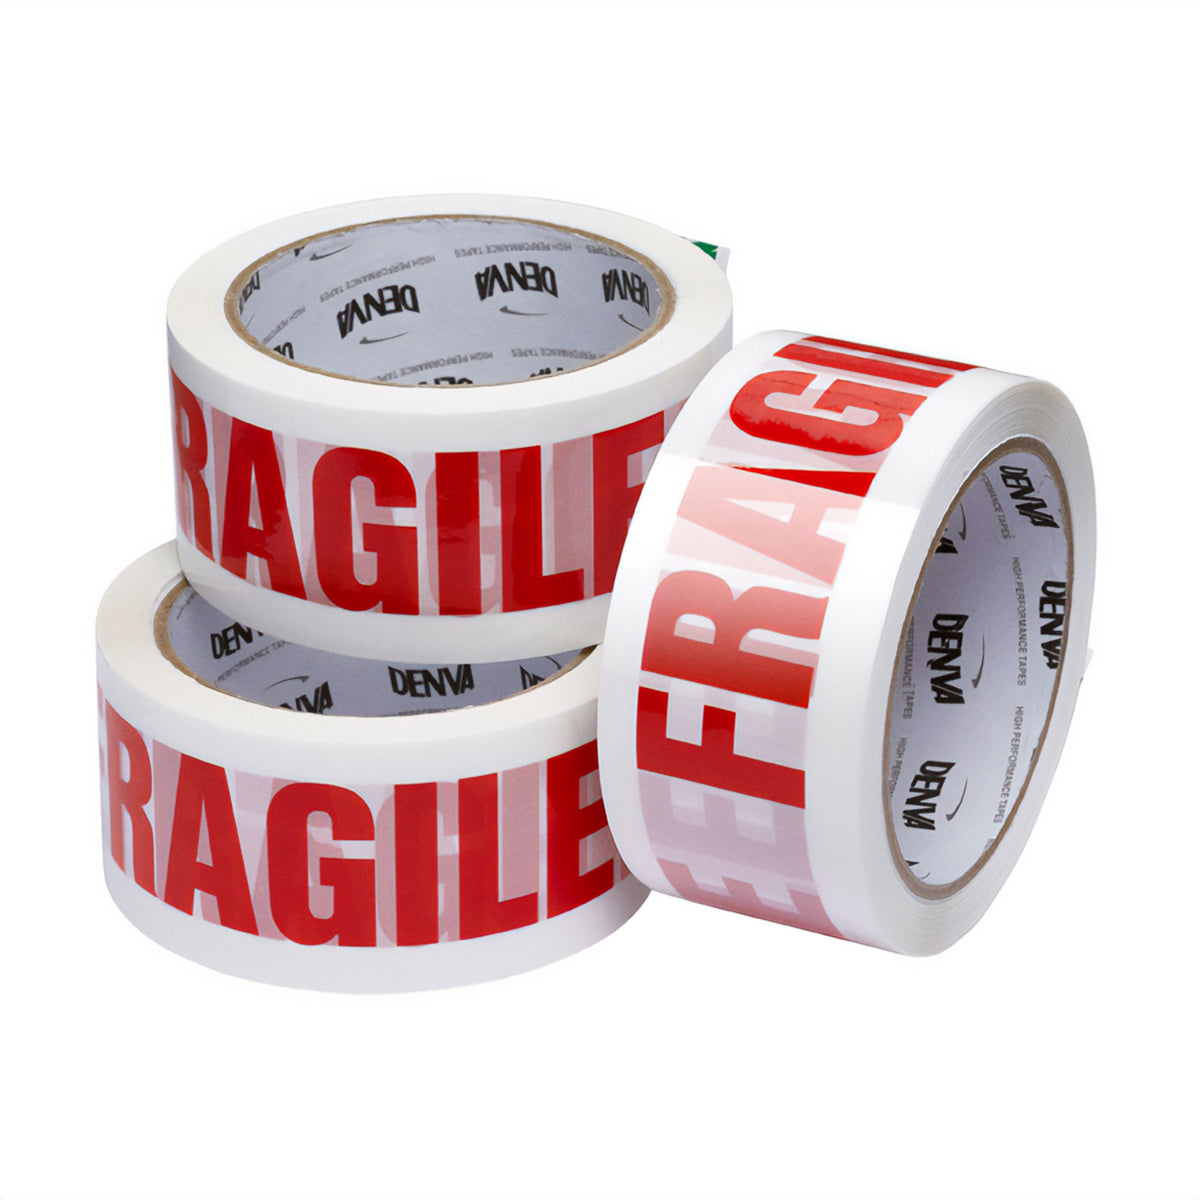 Fragile Packing Tape - 48mm x 33m